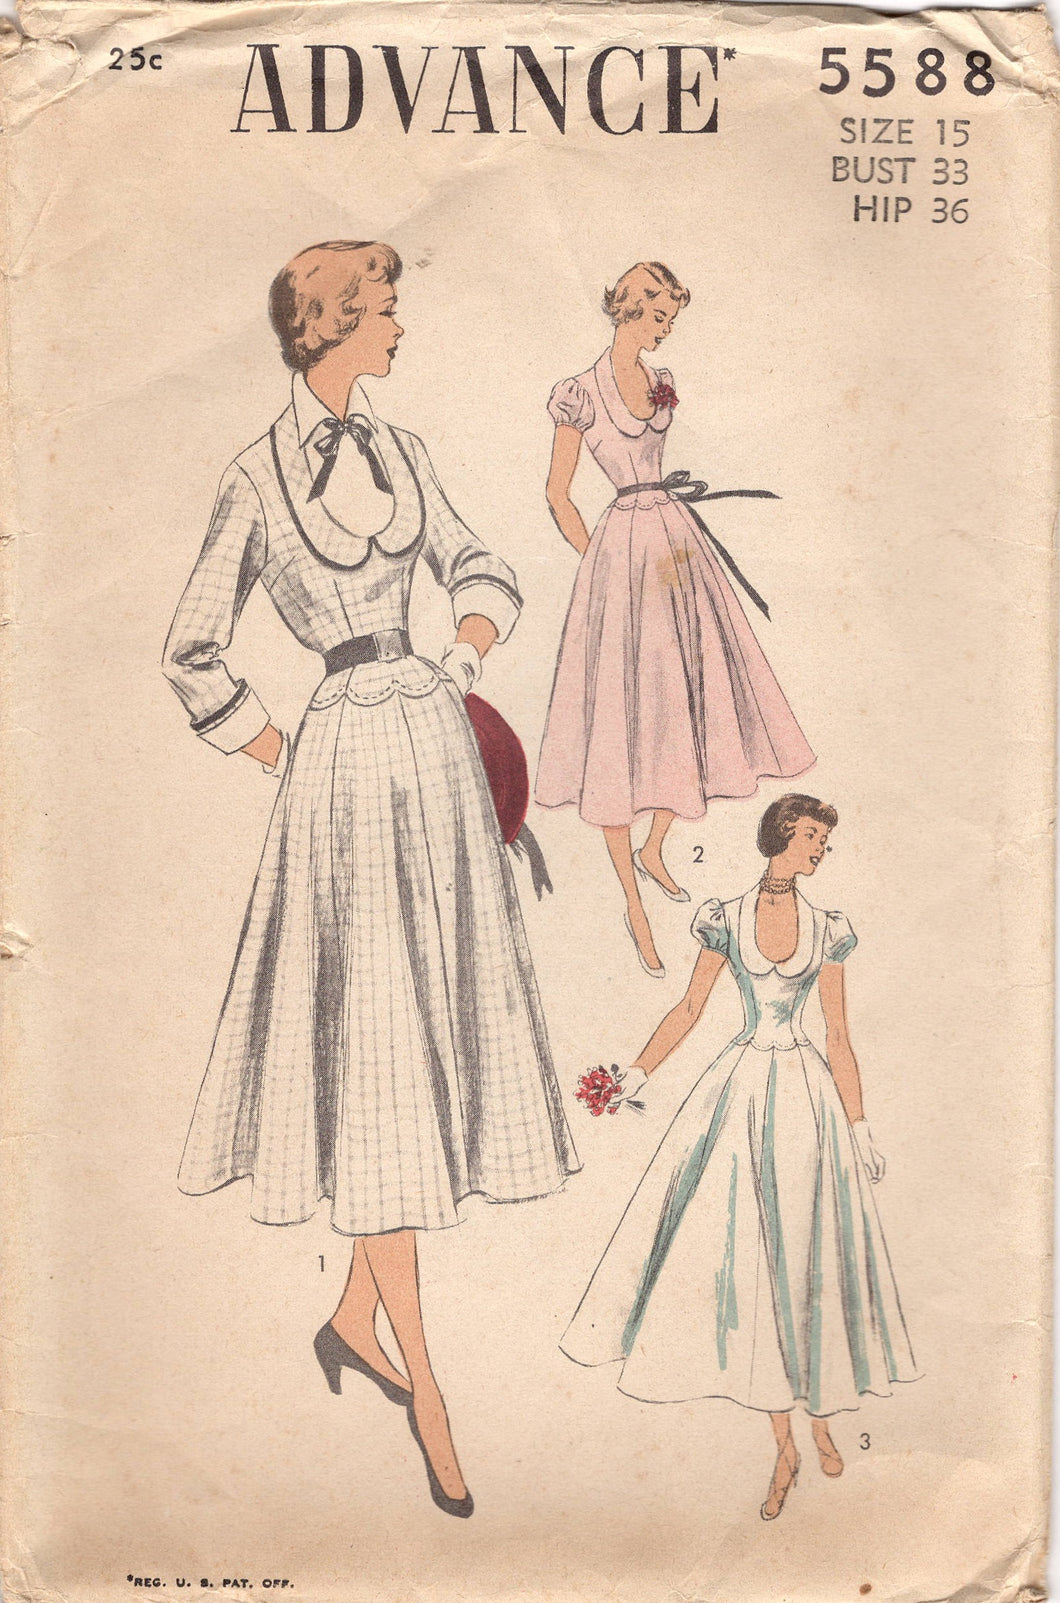 1950's Advance One Piece Dress Pattern with Scallop Details, Scoop Neckline and Puff or 3/4 Sleeves - Bust 33